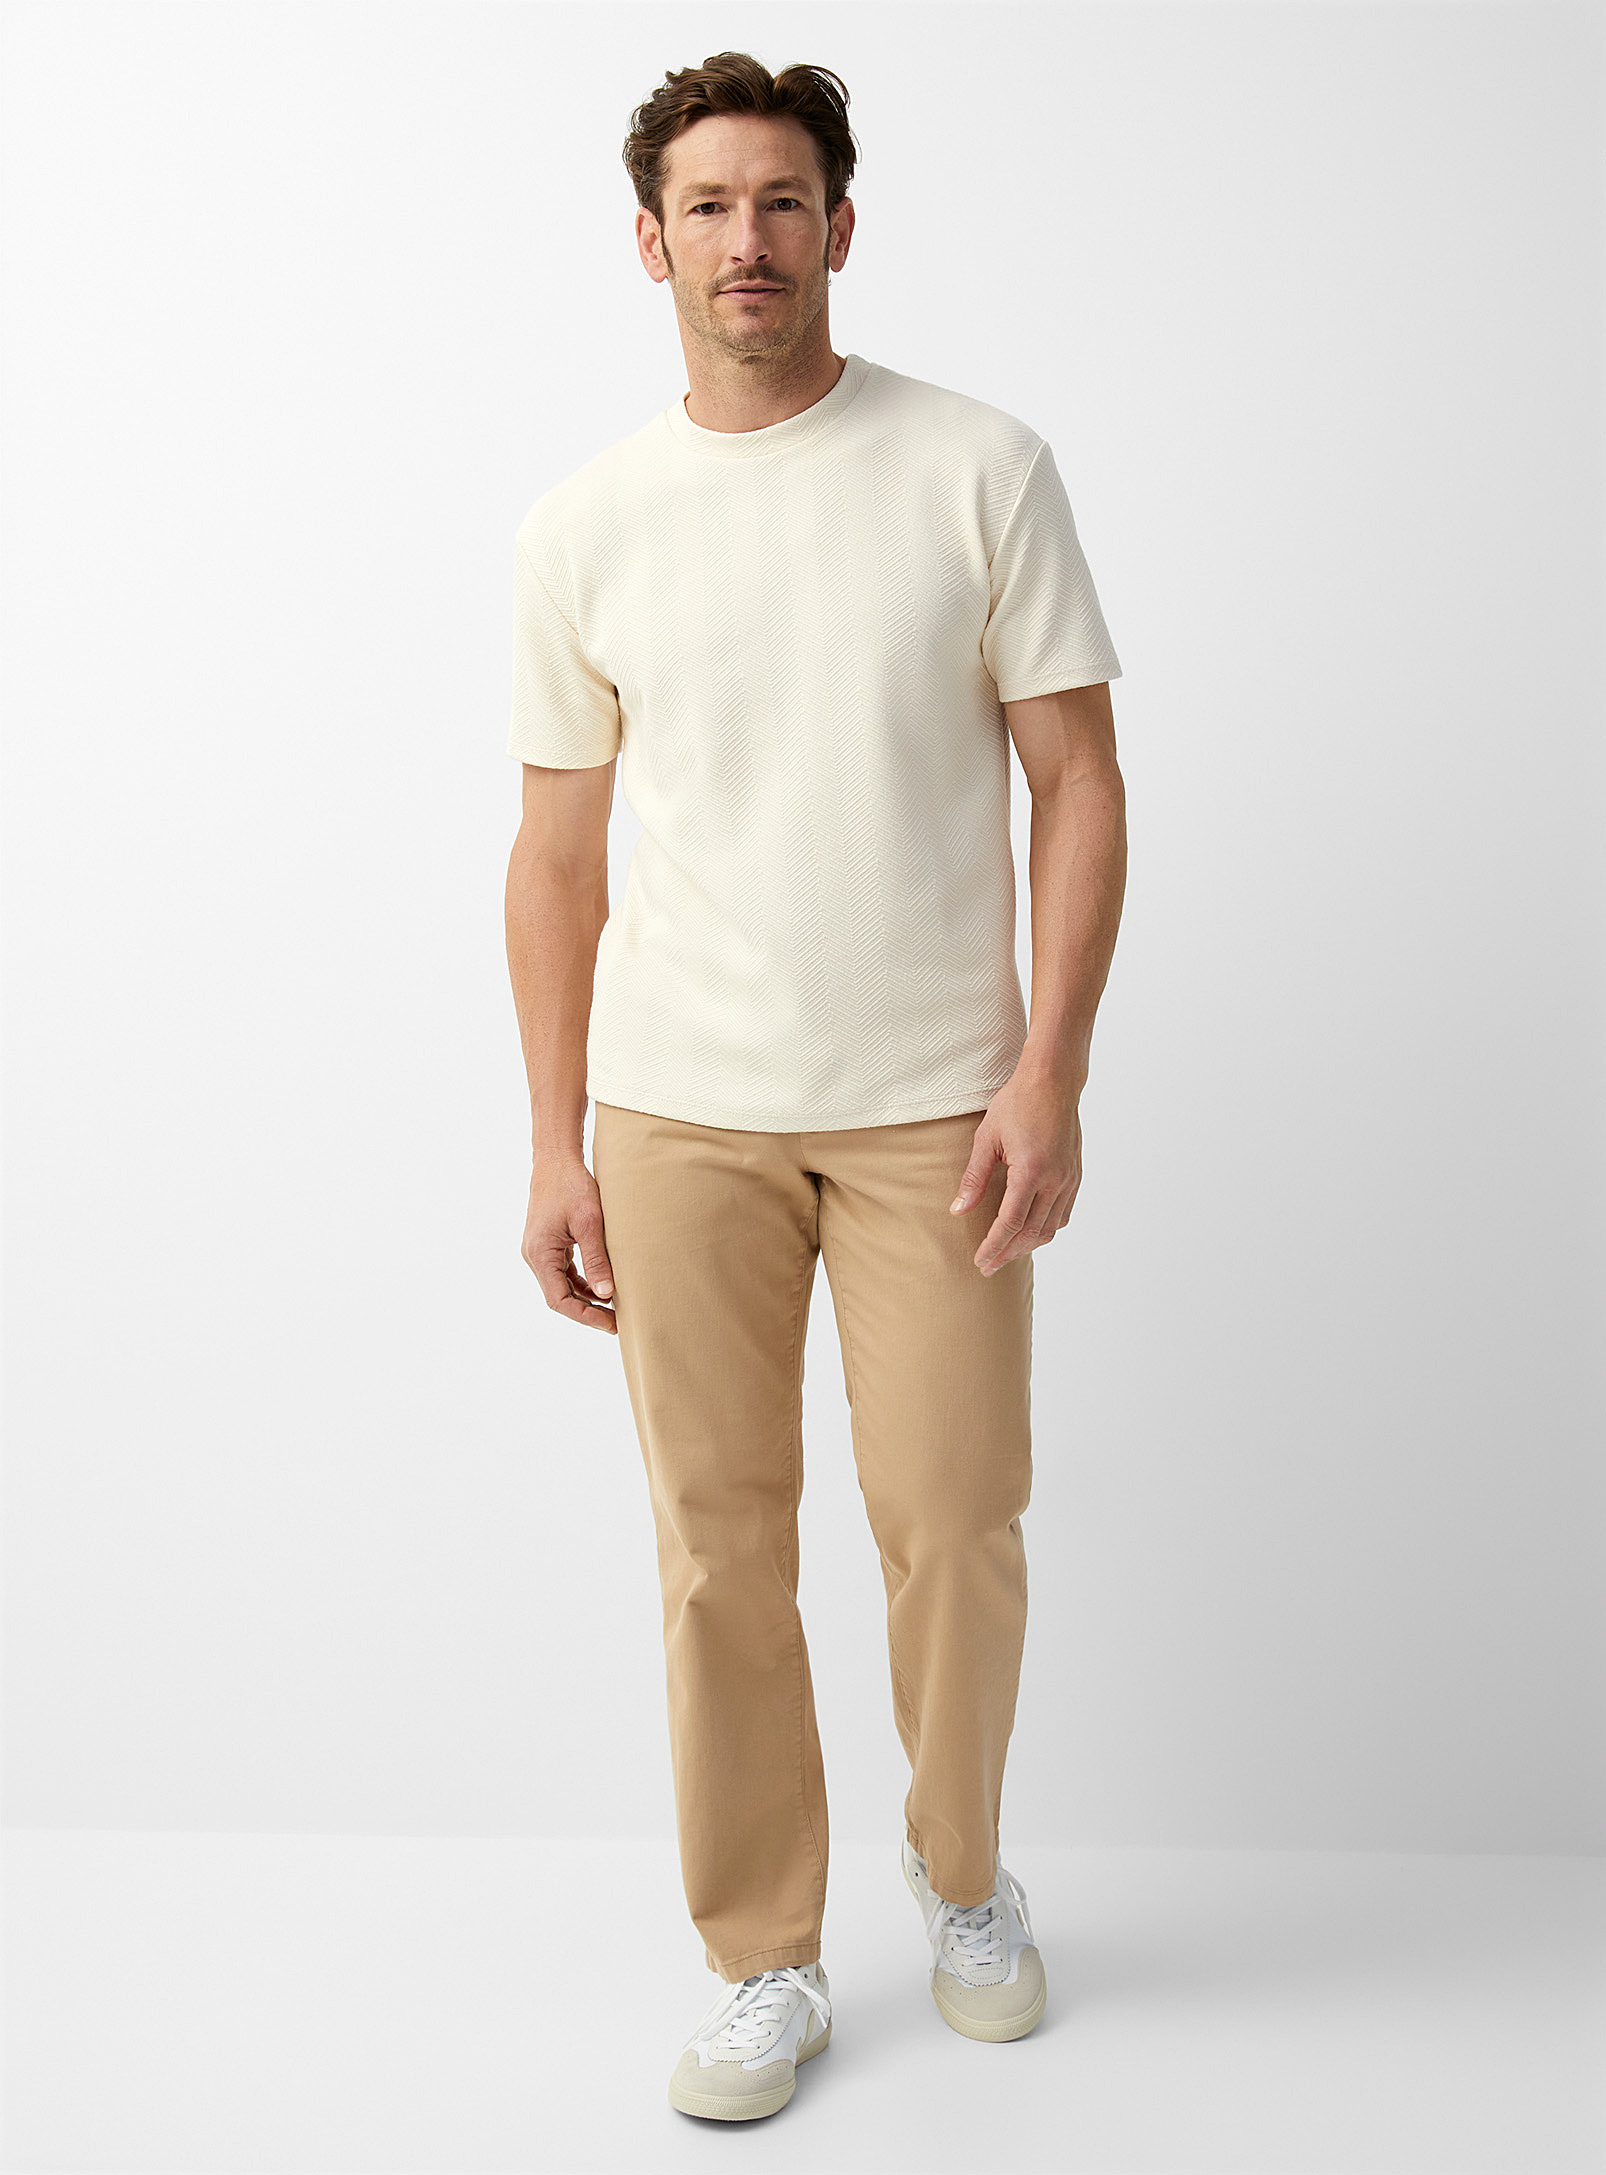 Frank And Oak - Men's Sand Joey chinos Straight fit